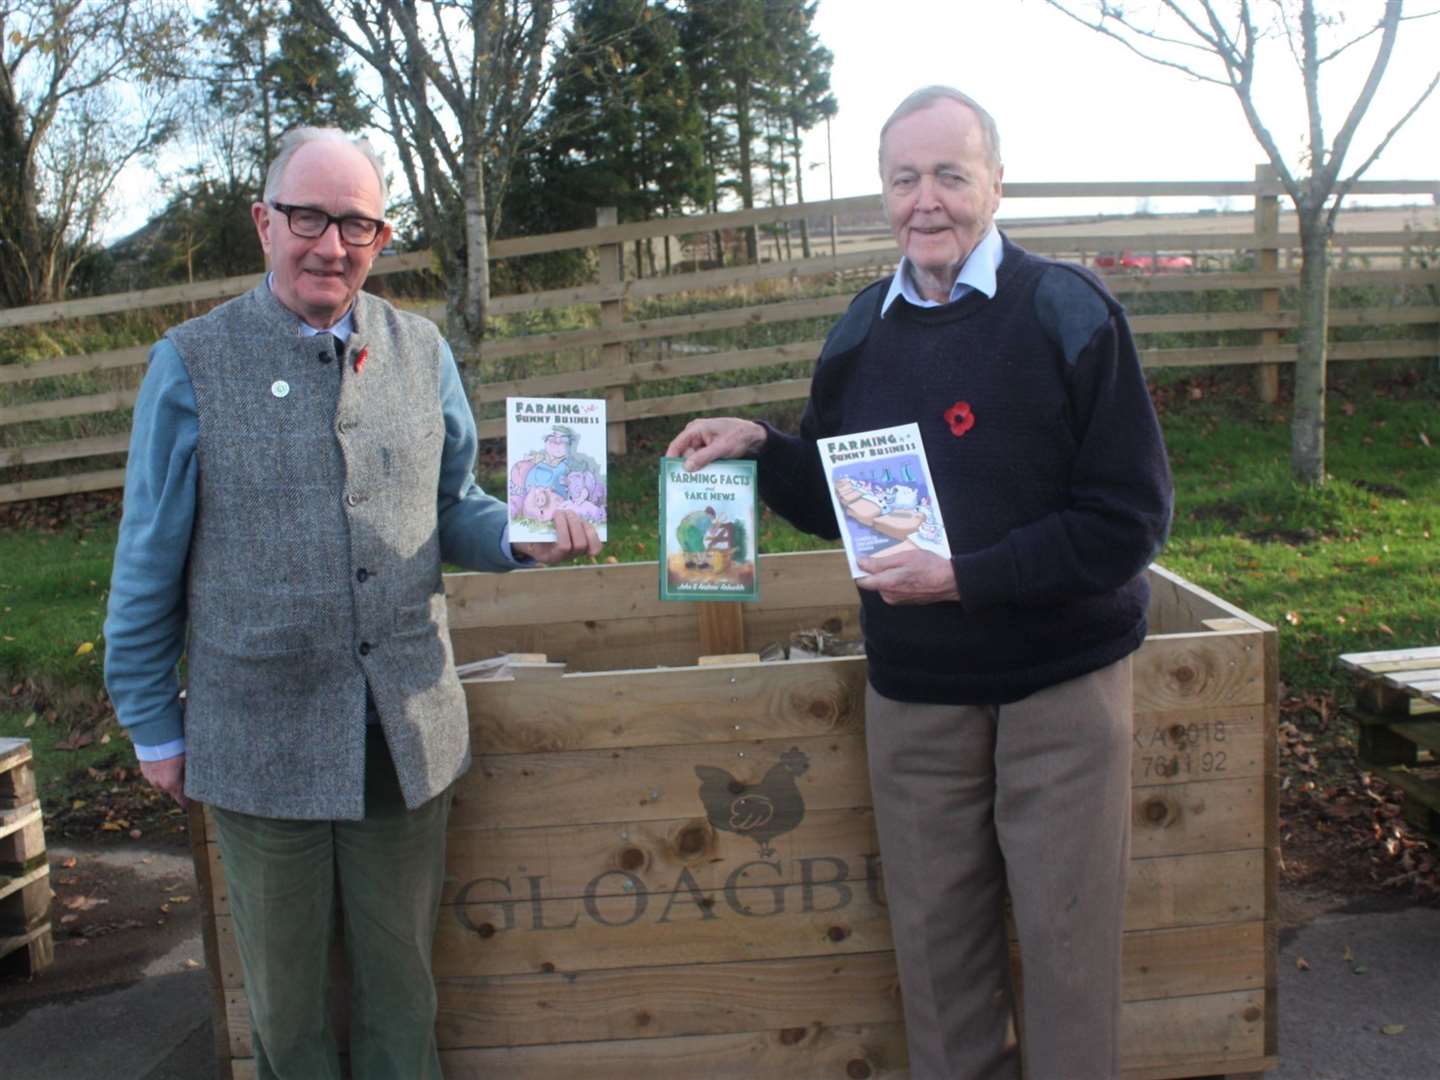 David Leggat and Andrew Arbuckle with copies of the very successful books.